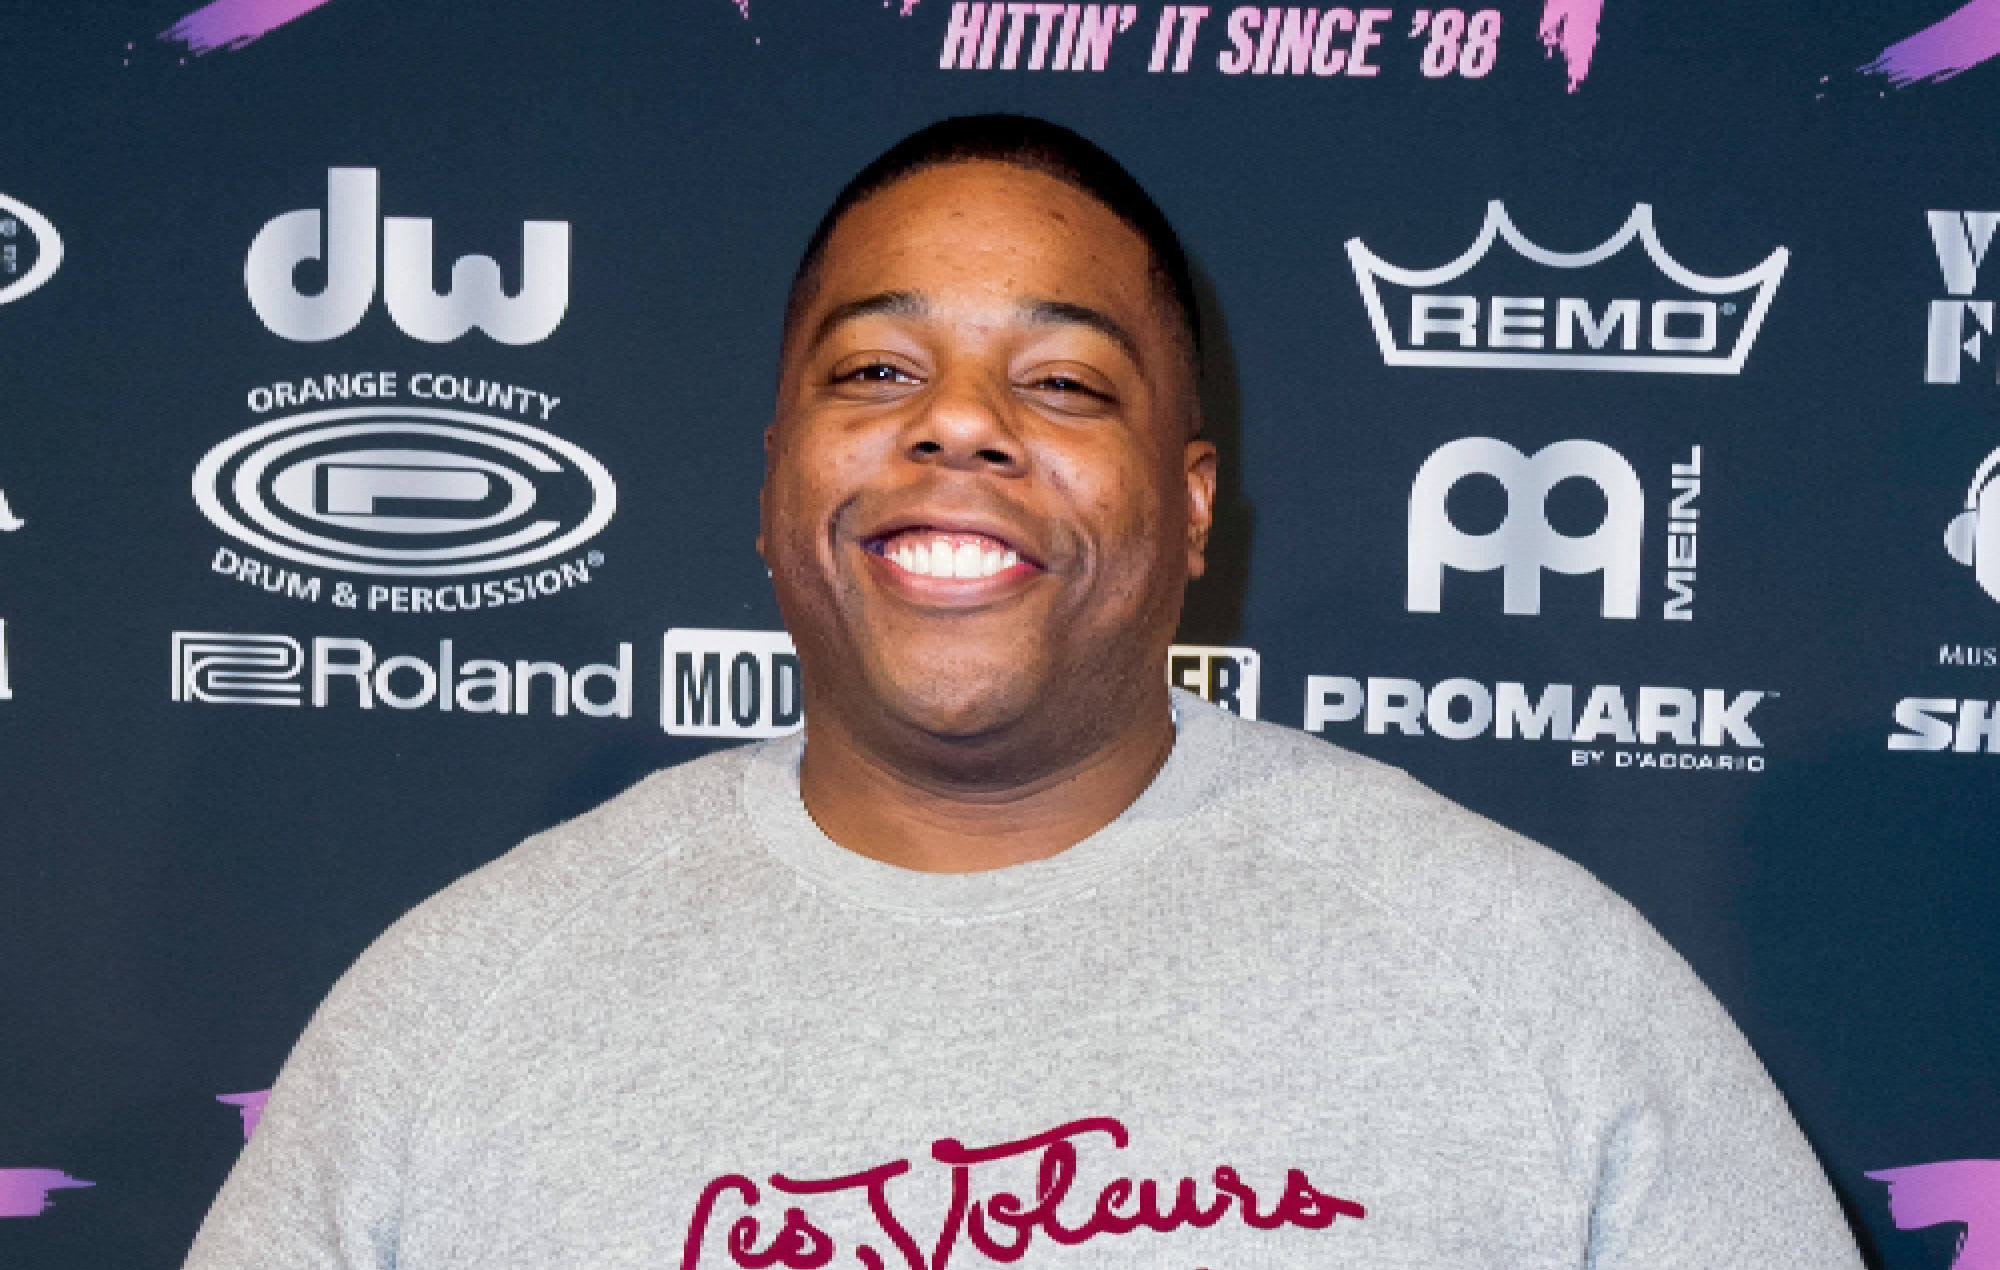 Aaron Spears, drummer for Ariana Grande and more, has died